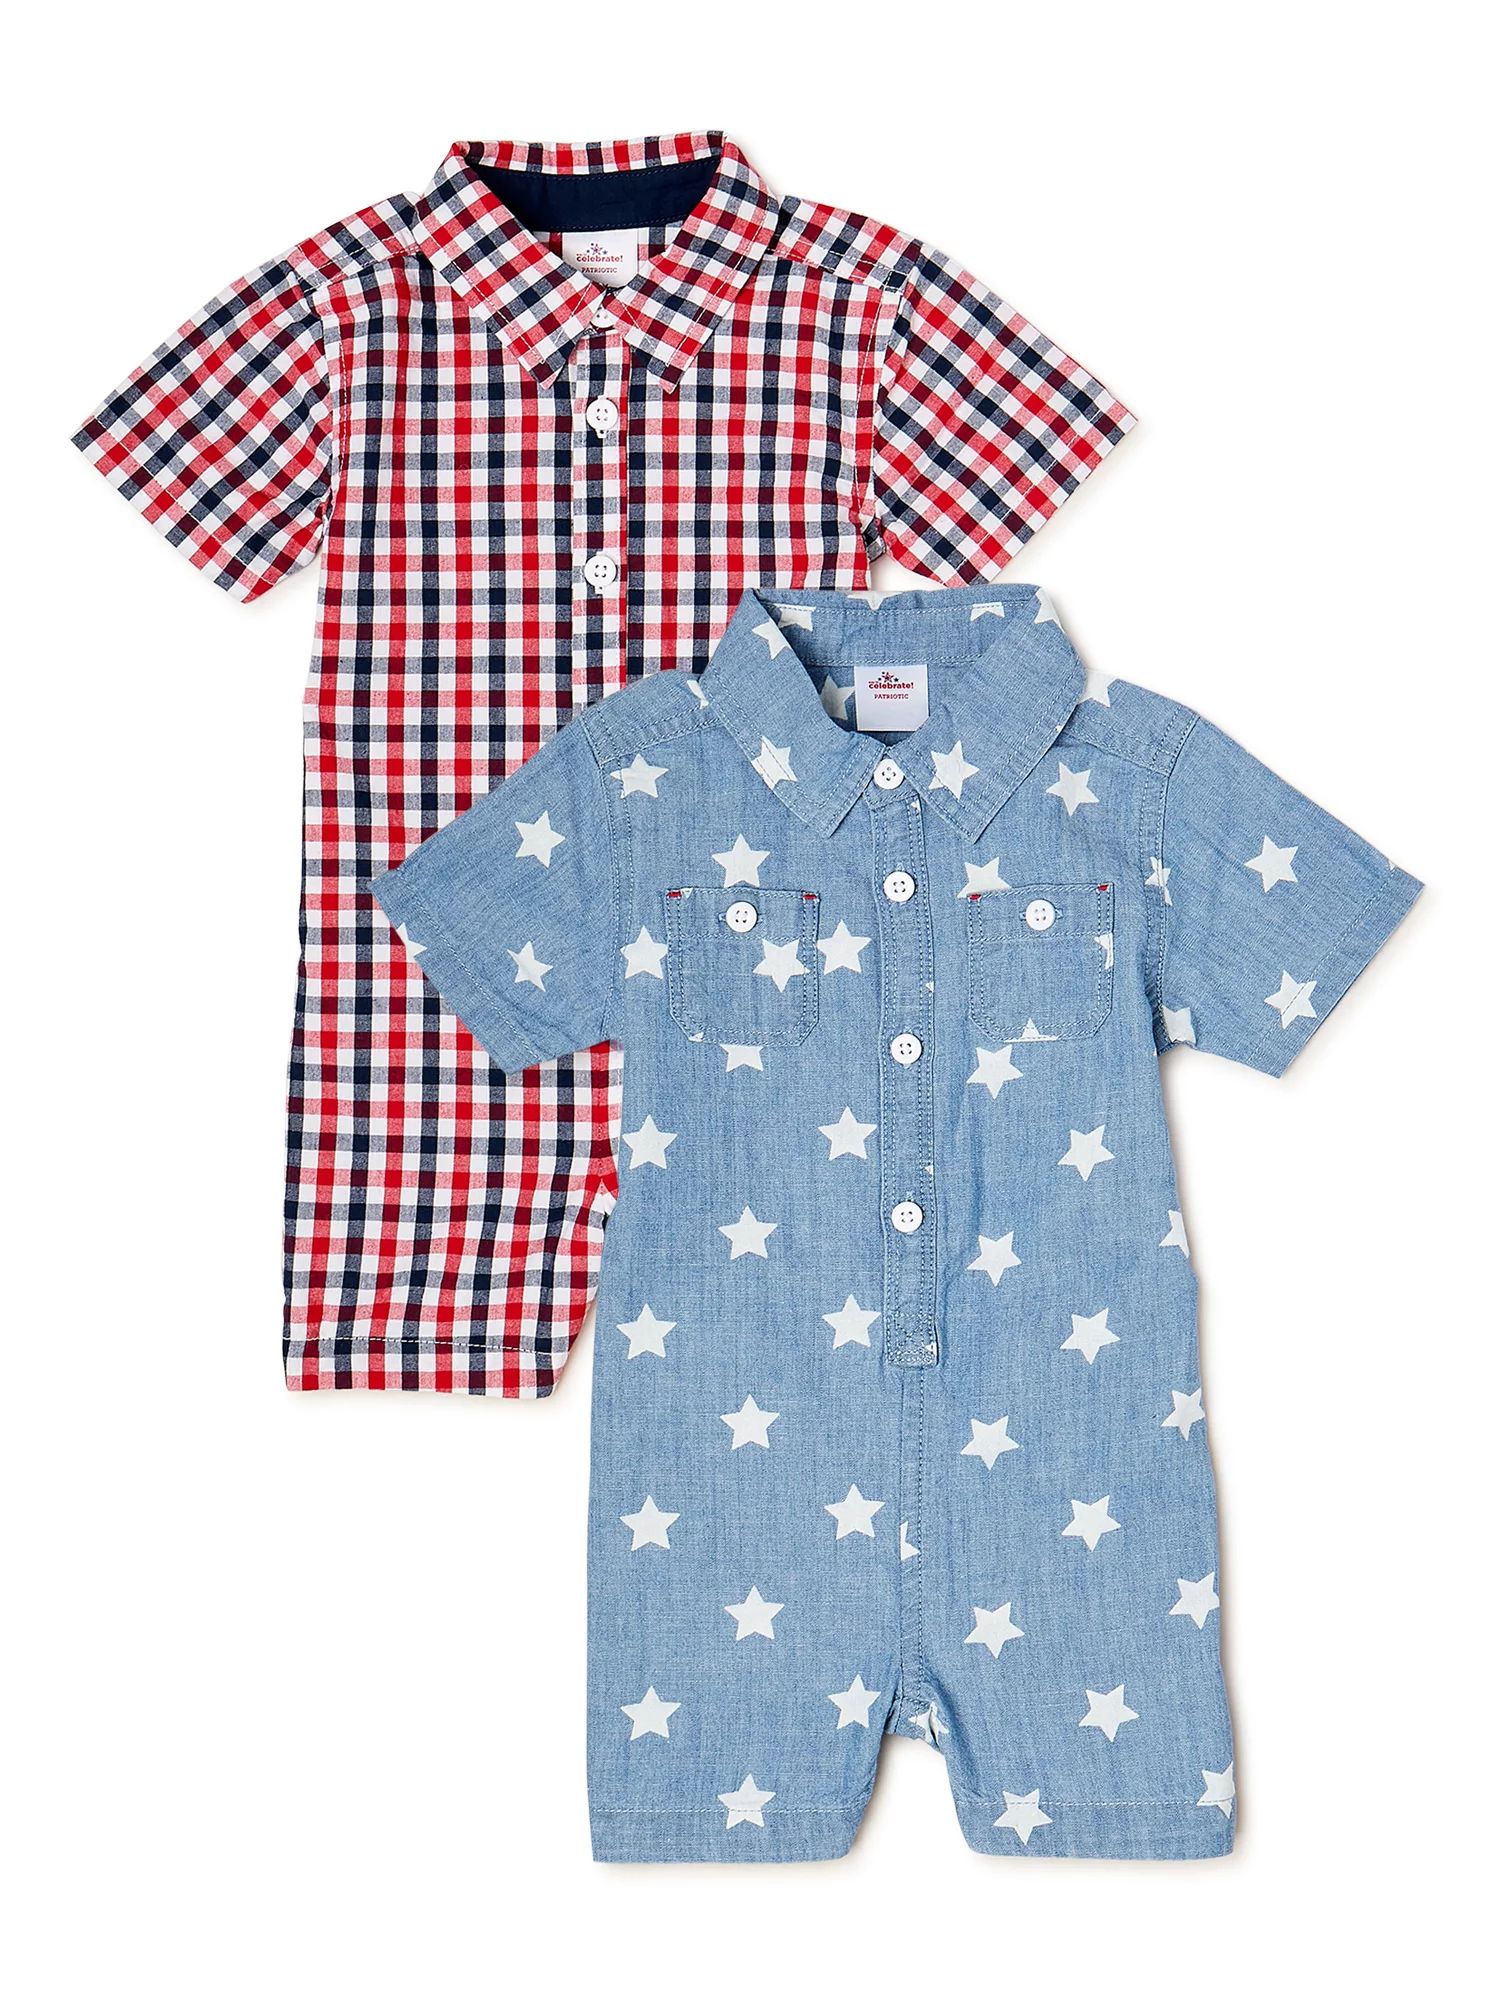 Americana Baby Boy Rompers, 2-Pack, Sizes 0/3 Months-24 Months | Walmart (US)